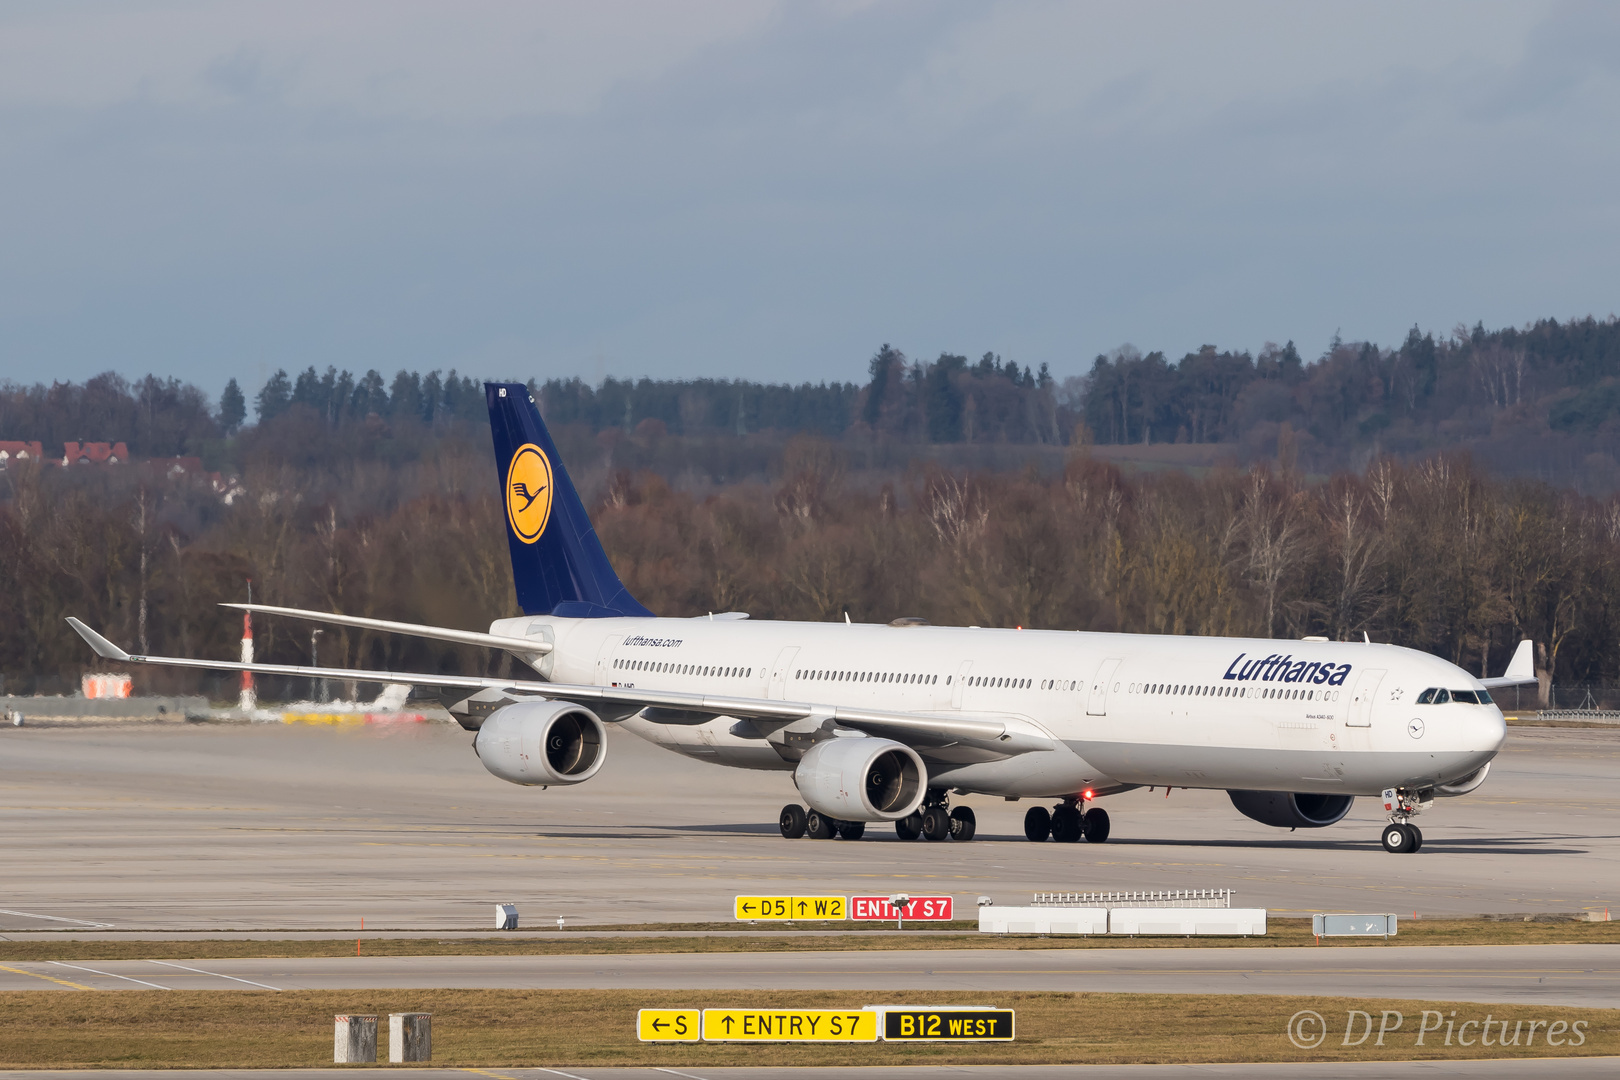 A346 in München